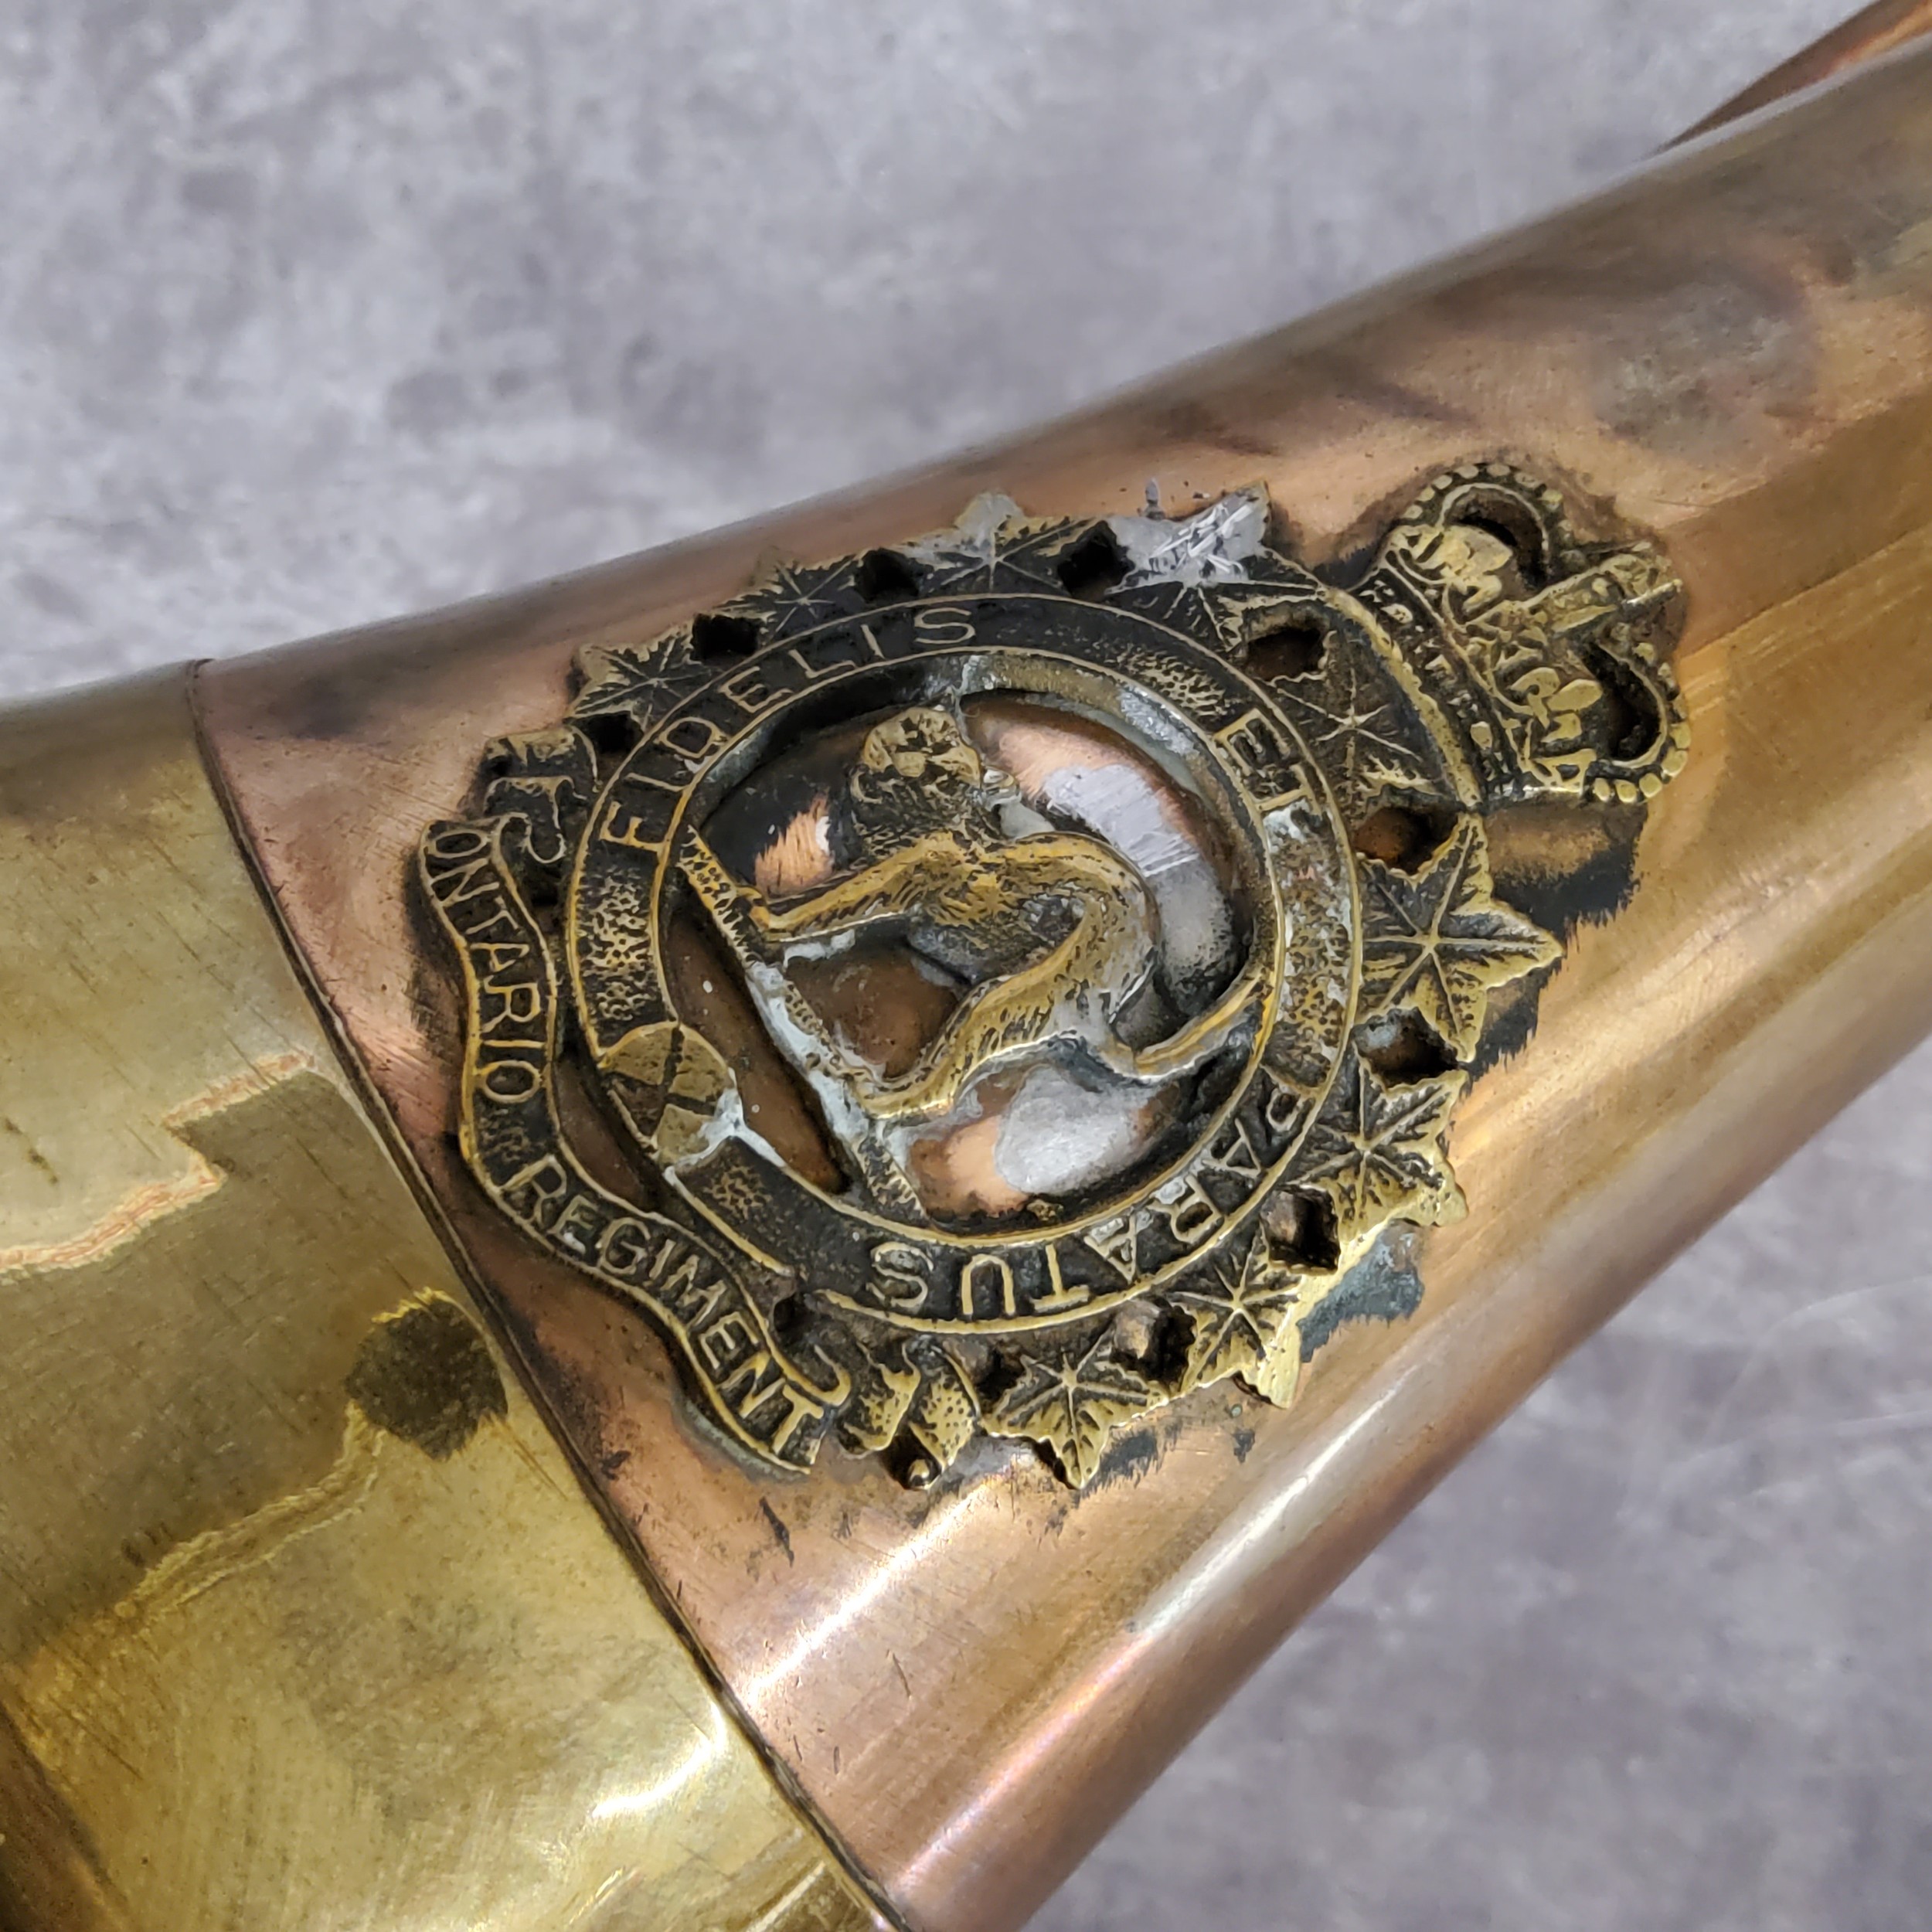 Militaria - A WWI copper and brass bugle with Ontario Regiment badge of a cat with arched back - Image 4 of 4